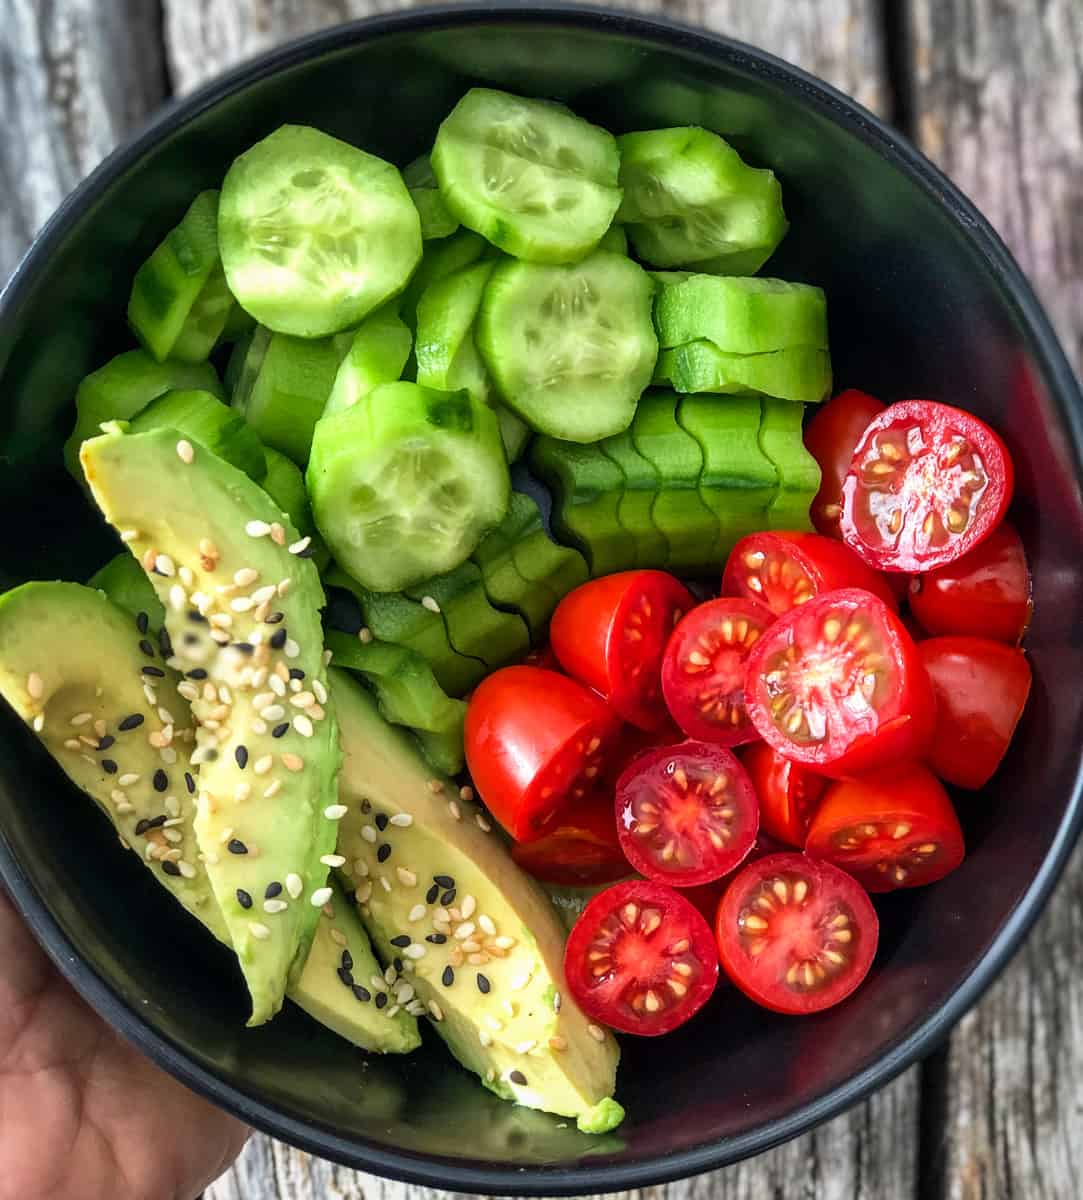 Bowl of cucumbers tomatoes and avocado slices.